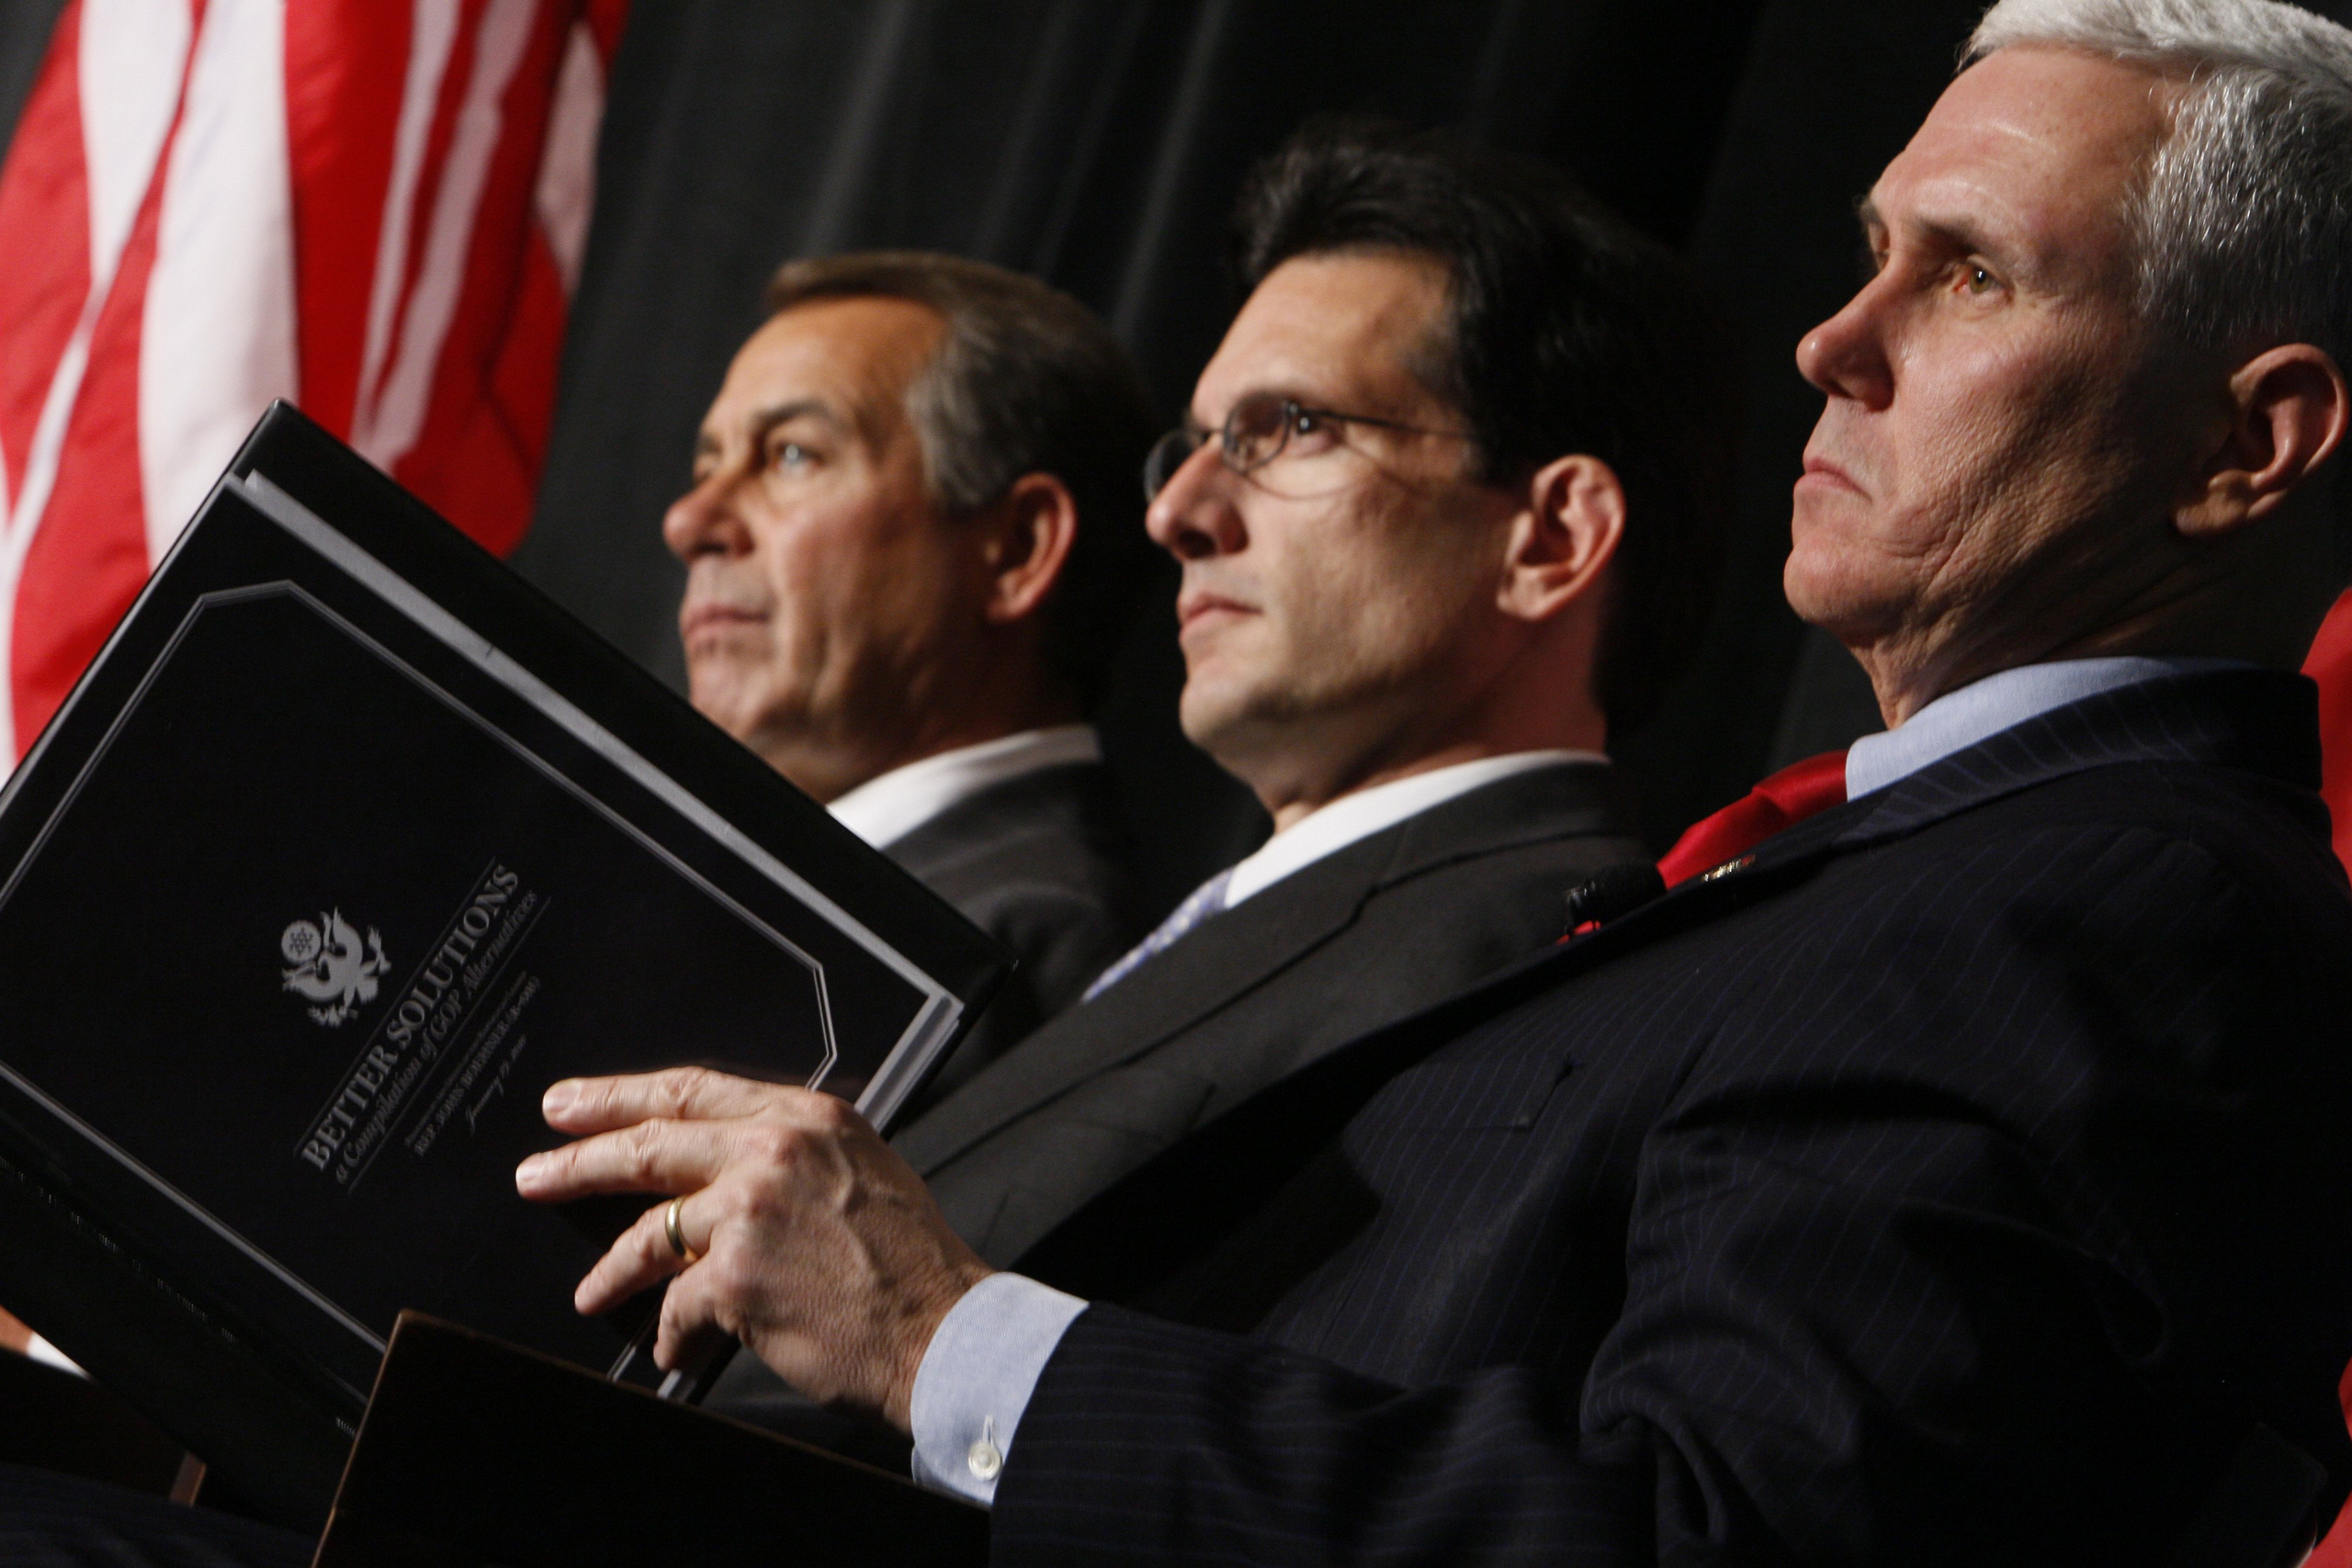 From left, House Minority Leader John Boehner of Ohio, House Minority Whip Eric Cantor of Va., and Rep. Mike Pence, R-Ind., listen as President Barack Obama speaks to Republican lawmakers at the GOP House Issues Conference in Baltimore on Jan. 29, 2010.